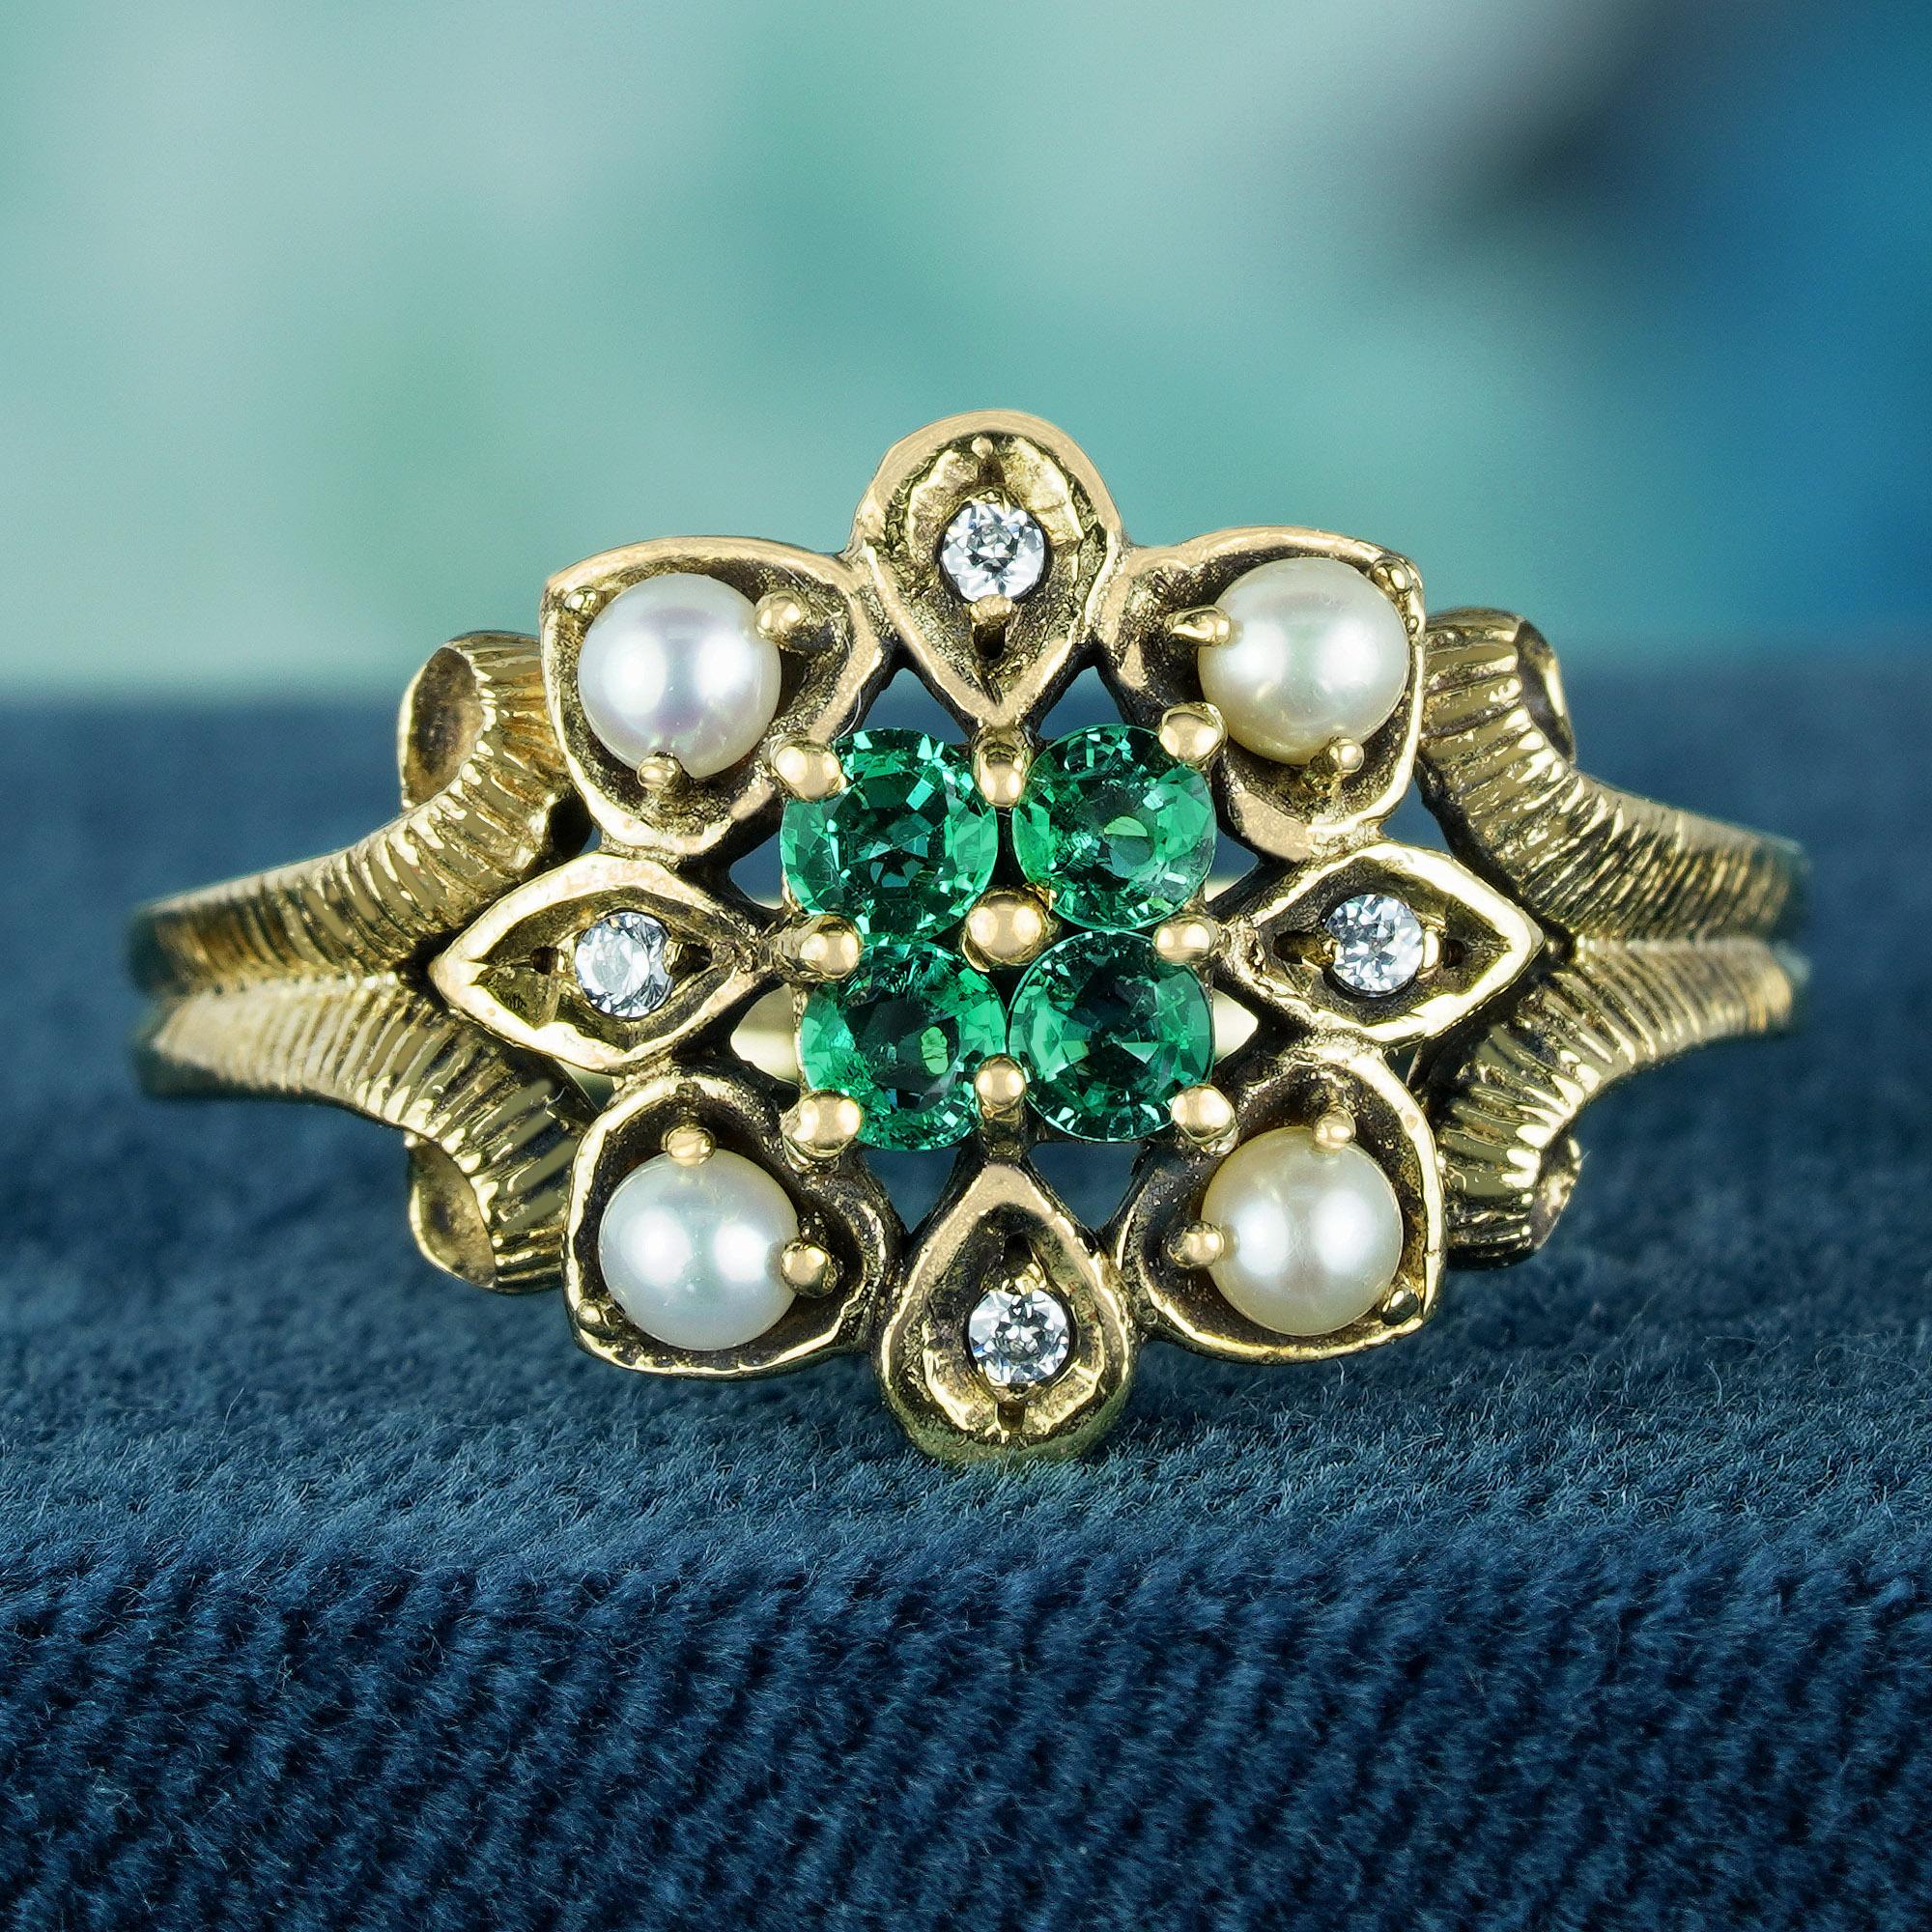 Crafted from luminous yellow gold, this mesmerizing ring boasts a central round emerald, elegantly encircled by four split pearls and four round diamonds, all delicately set in a prong setting. Adding to its allure is the intricate milgrain